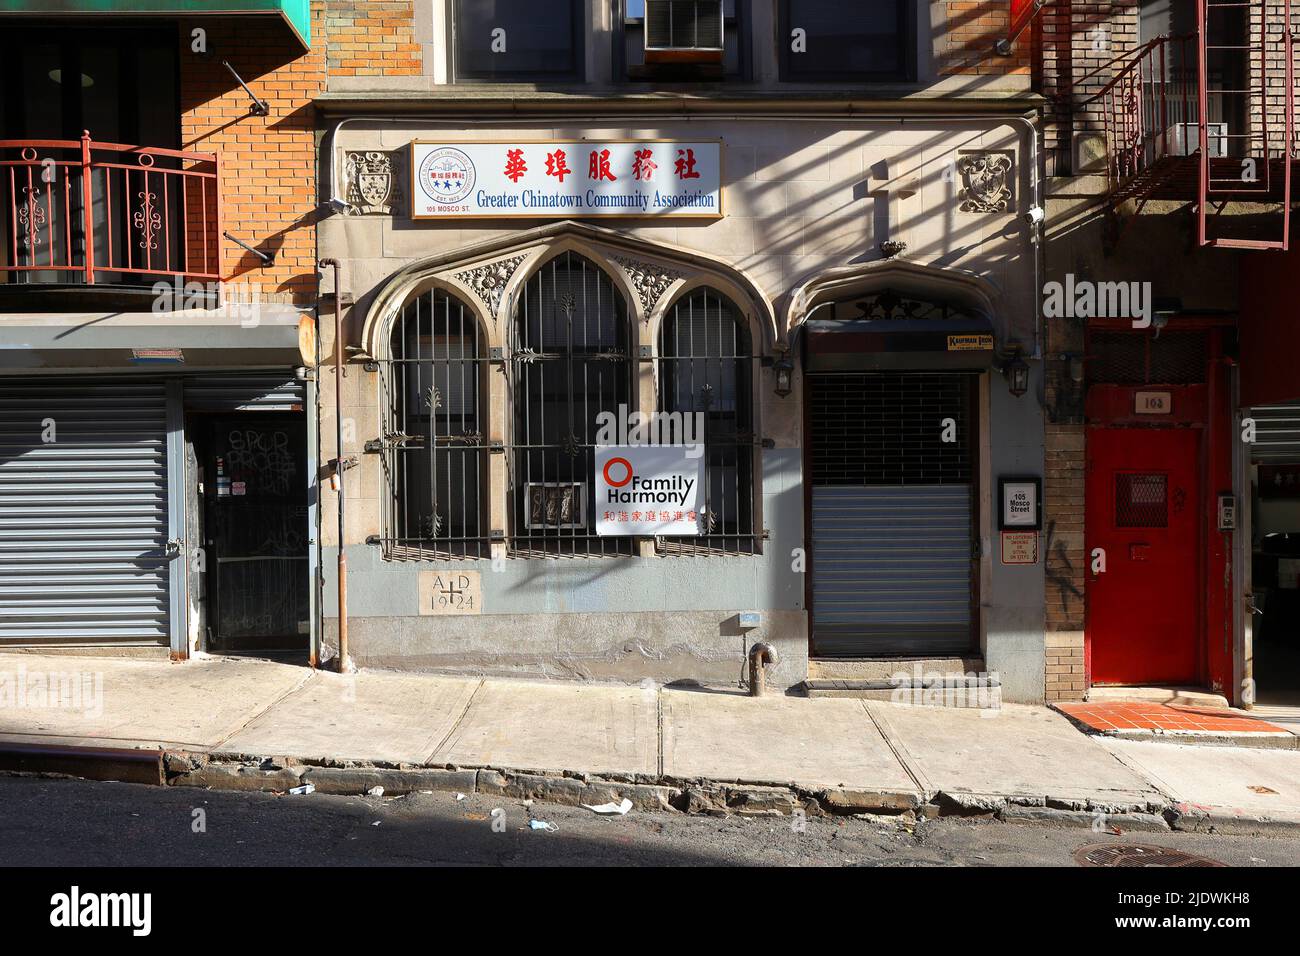 Greater Chinatown Community Association, 105 Mosco St, New York, NY. exterior storefront of a non profit in a church building in Chinatown. Stock Photo